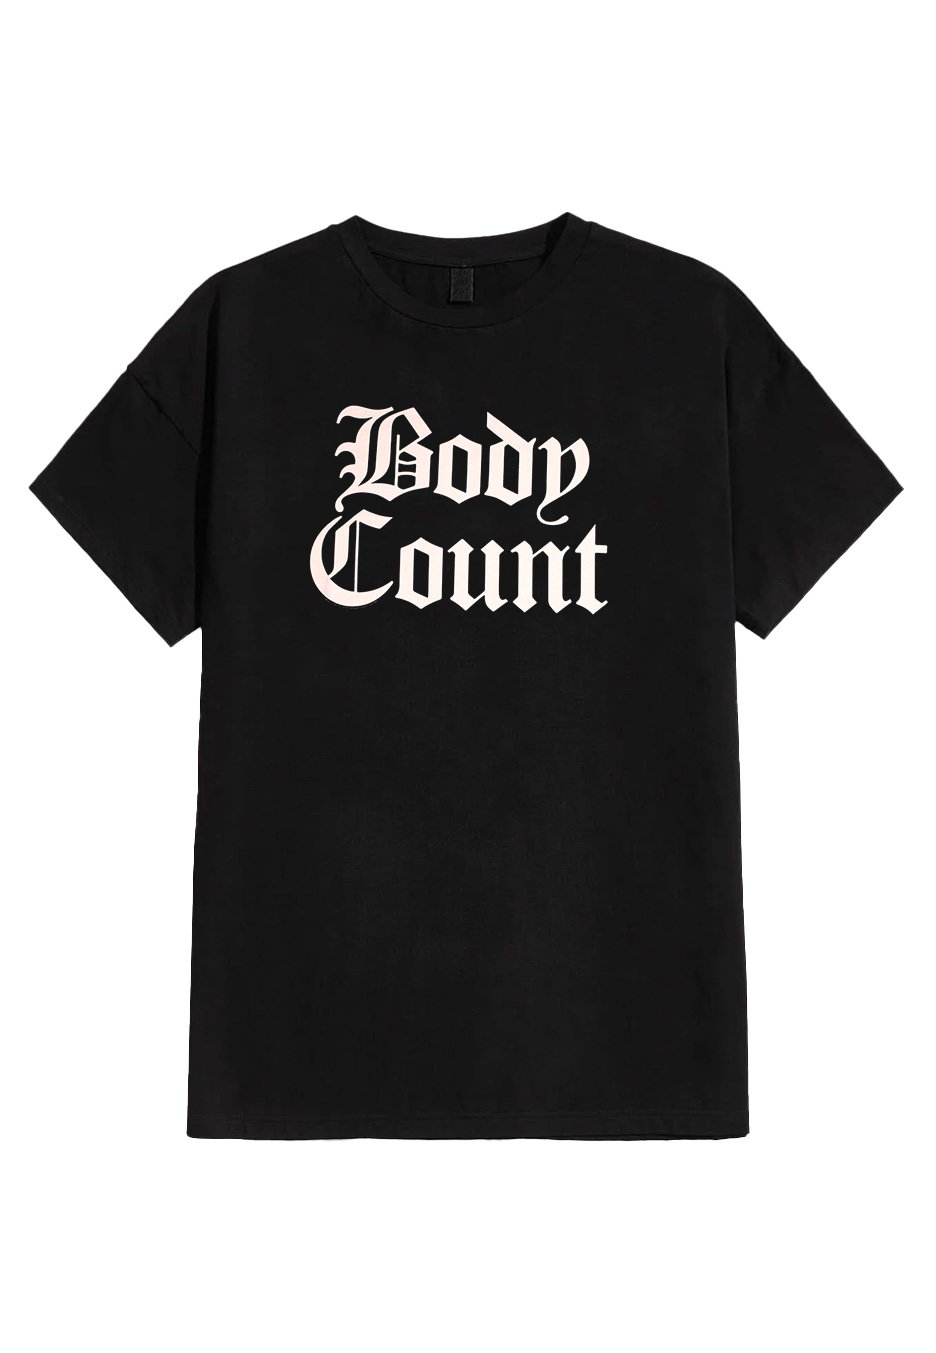 Body Count - Stacked Logo - T-Shirt